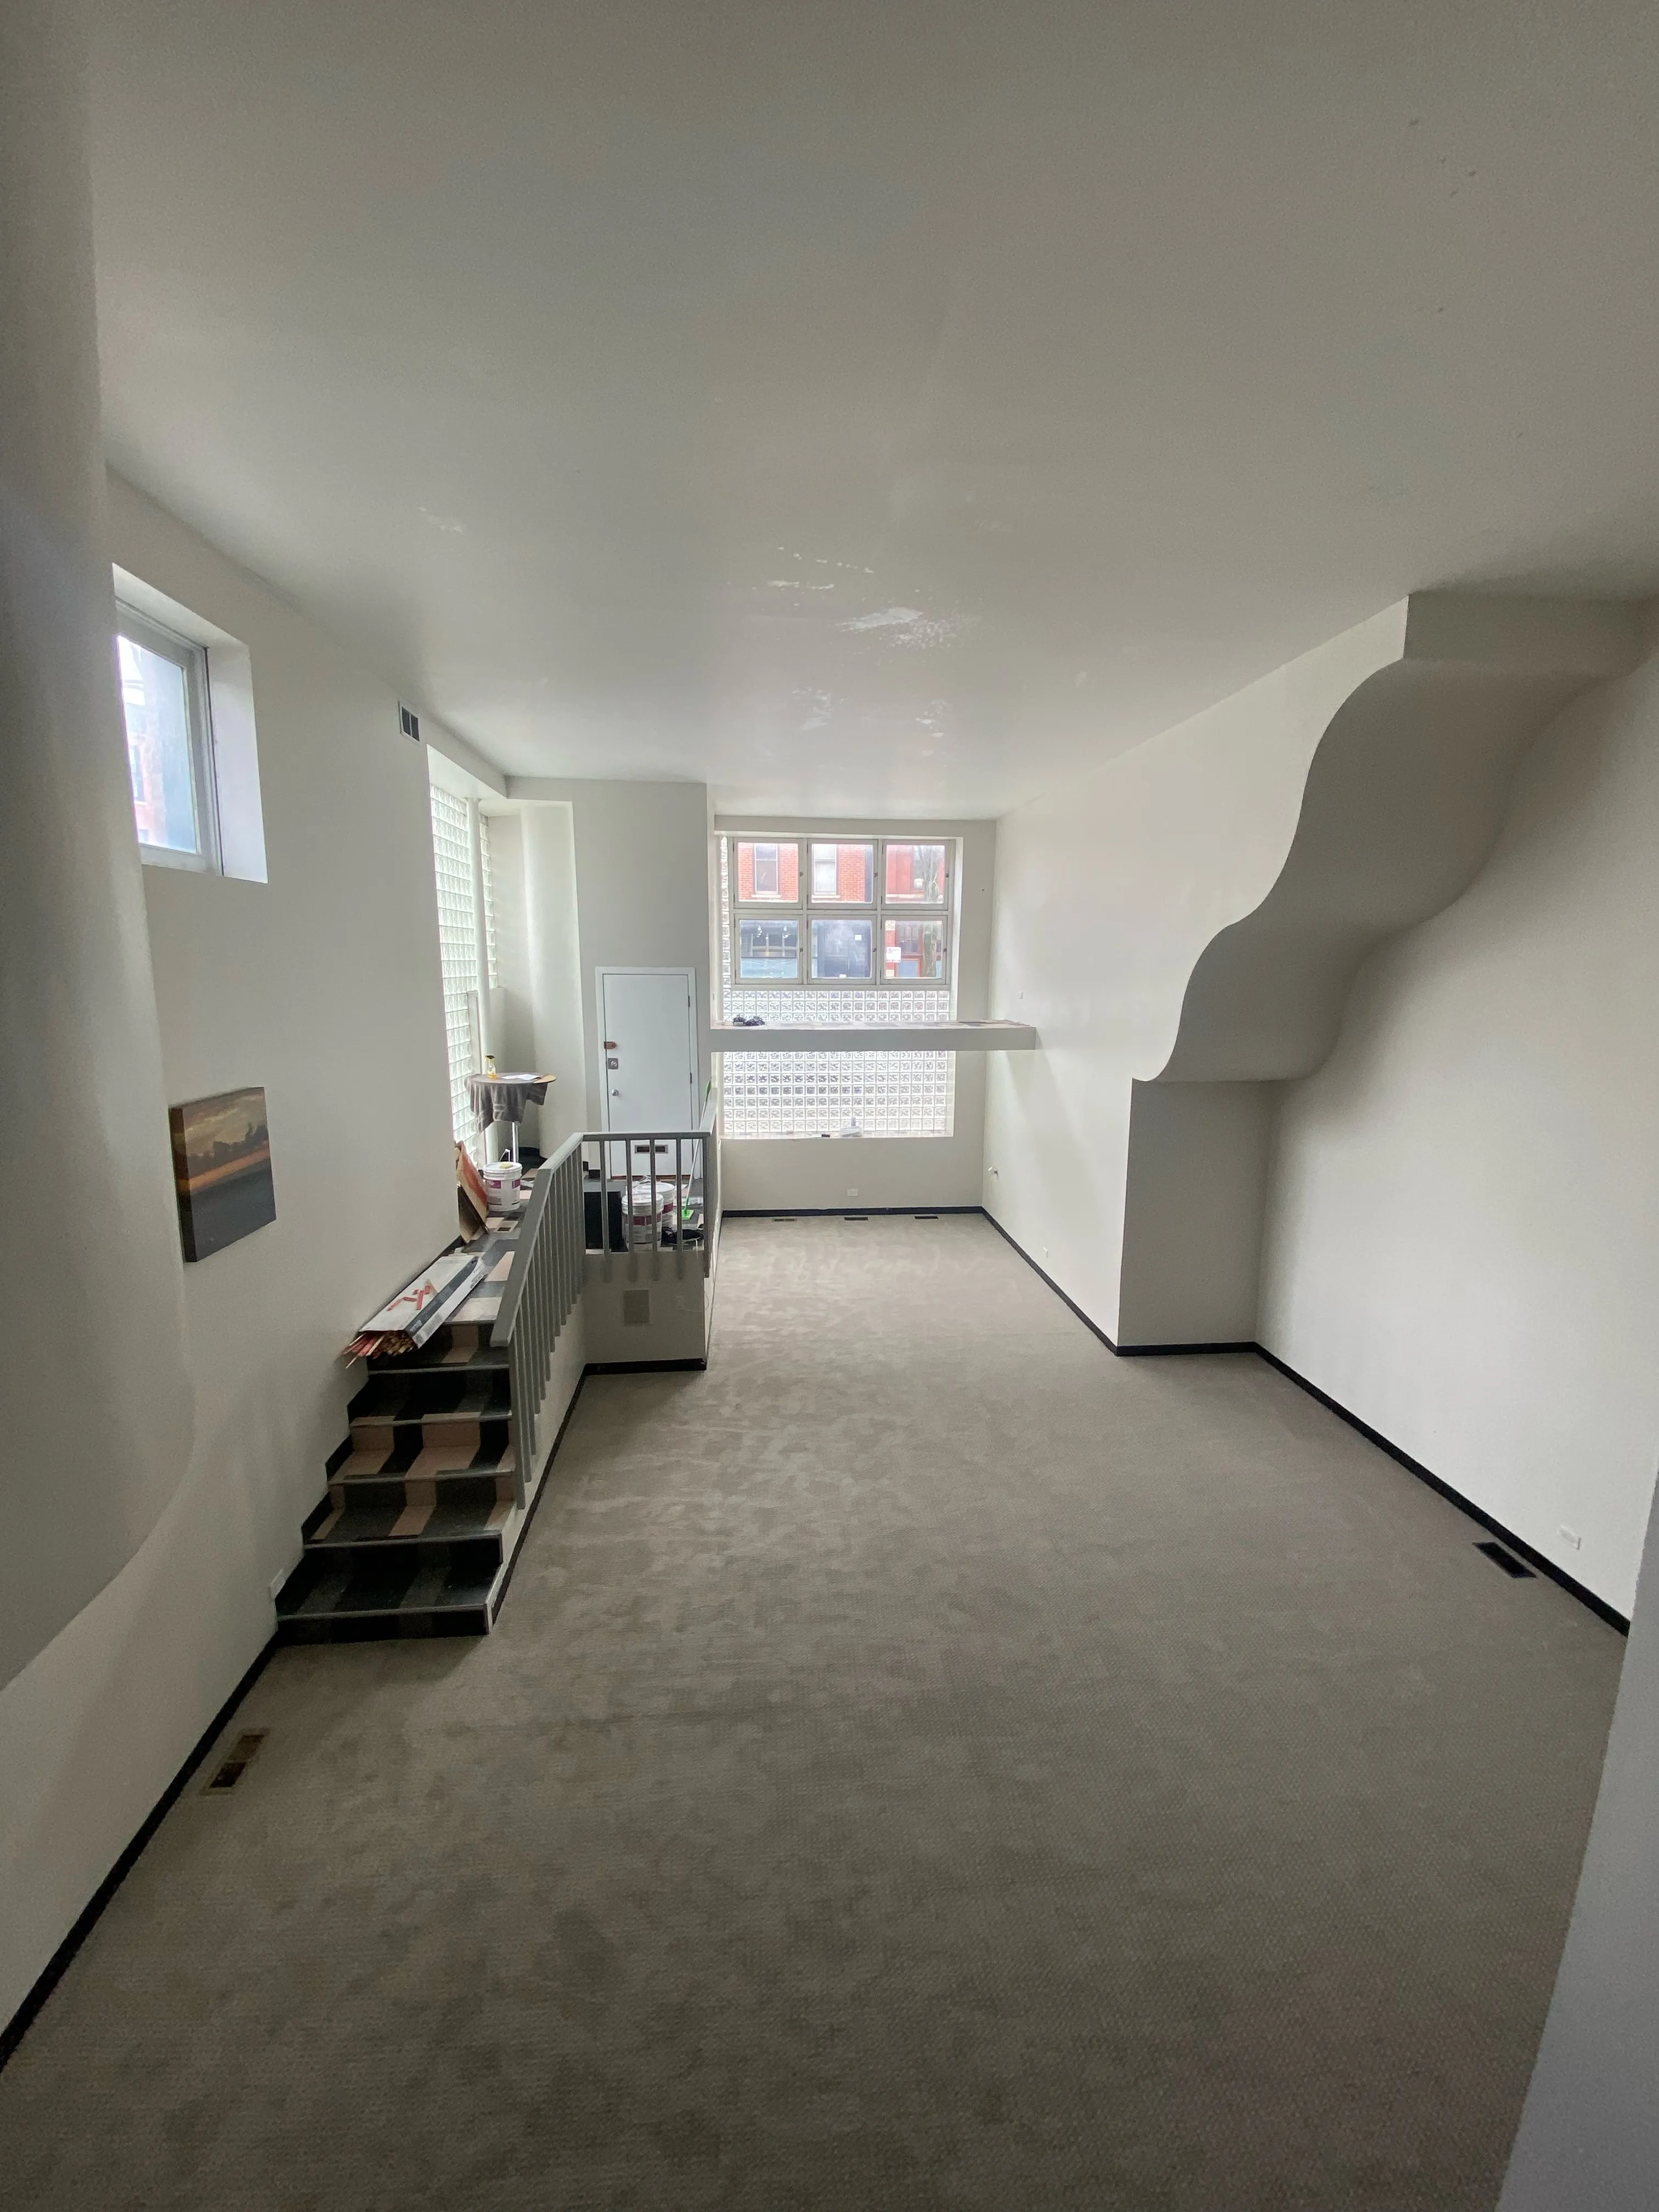 1100 W WEBSTER AVE 60614-unit#01-Chicago-IL